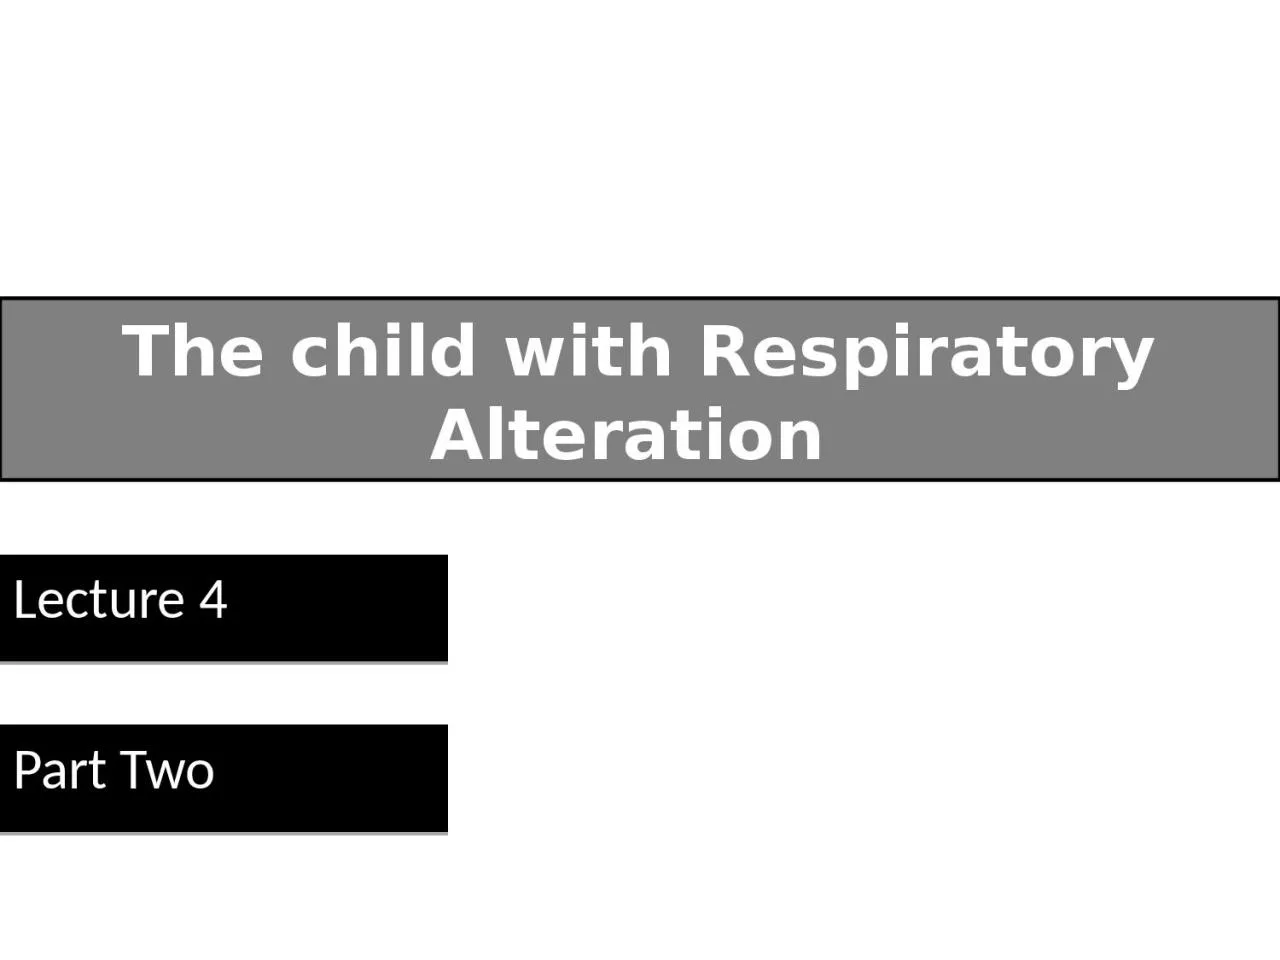 The child with Respiratory Alteration